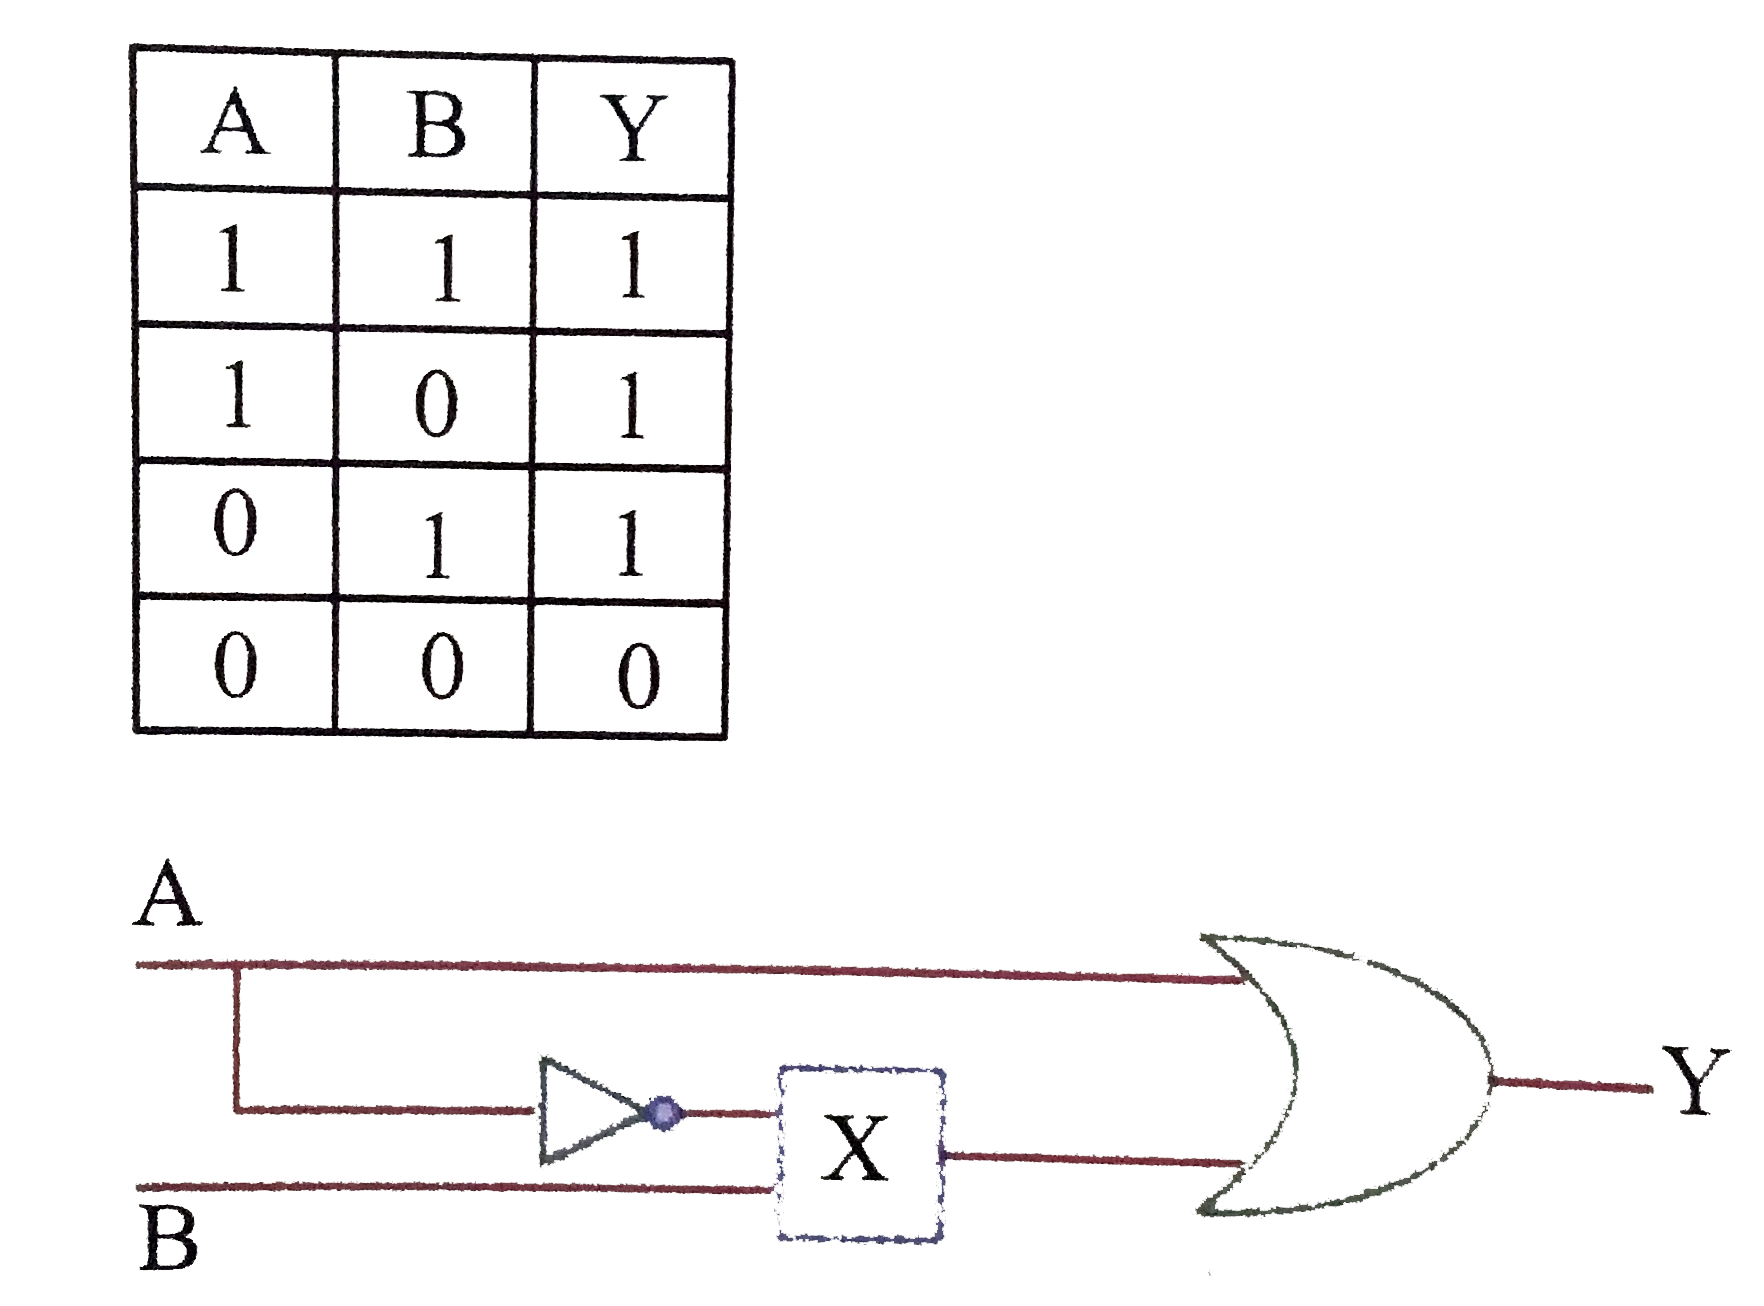 The logic circuit and its  truth table are given, what is the gate X in the diagram   .